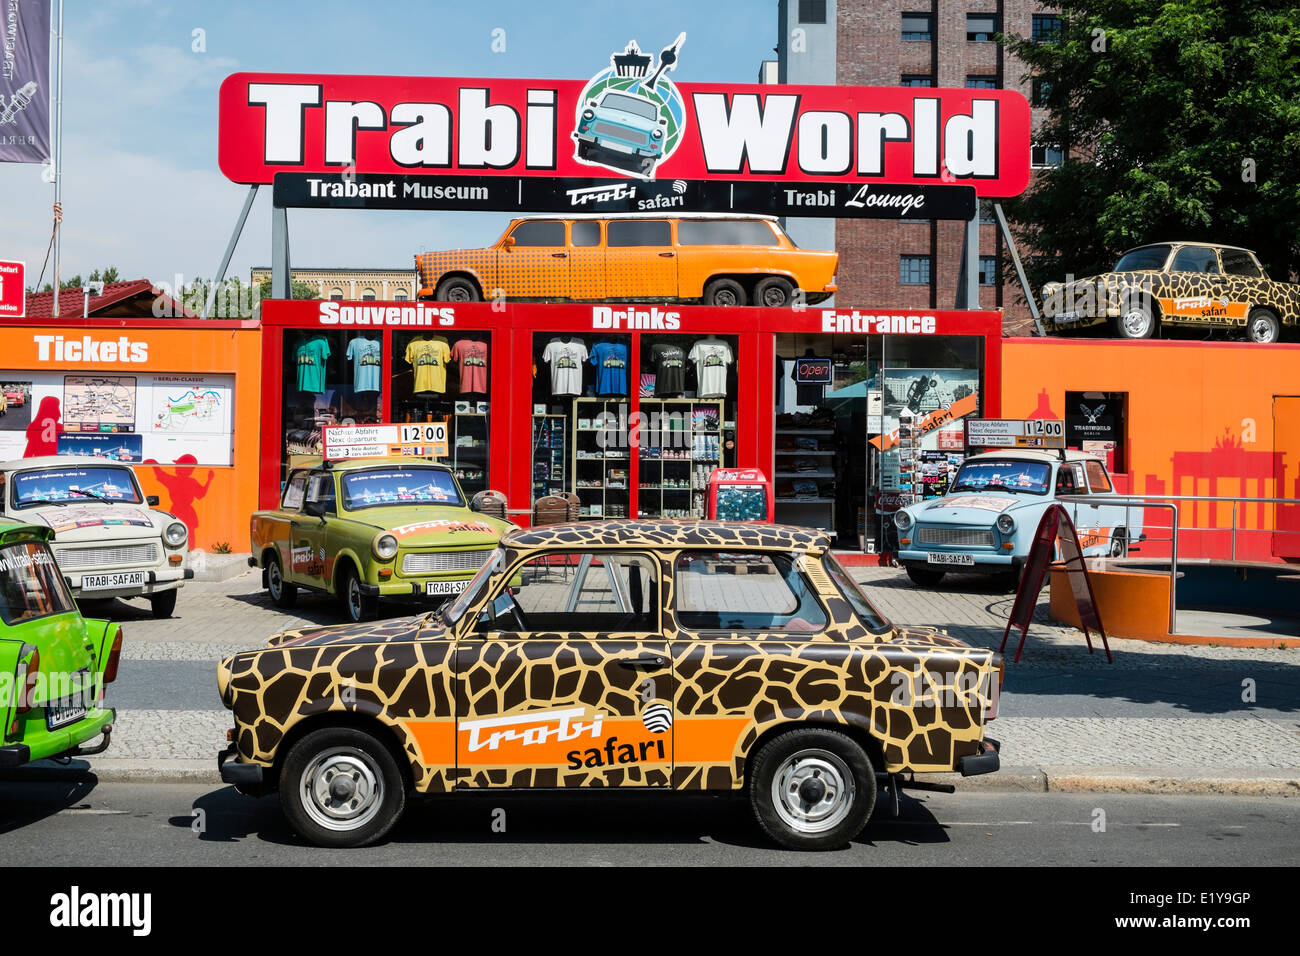 Trabi World guided tours by vintage East German Trabant cars in Berlin Germany Stock Photo